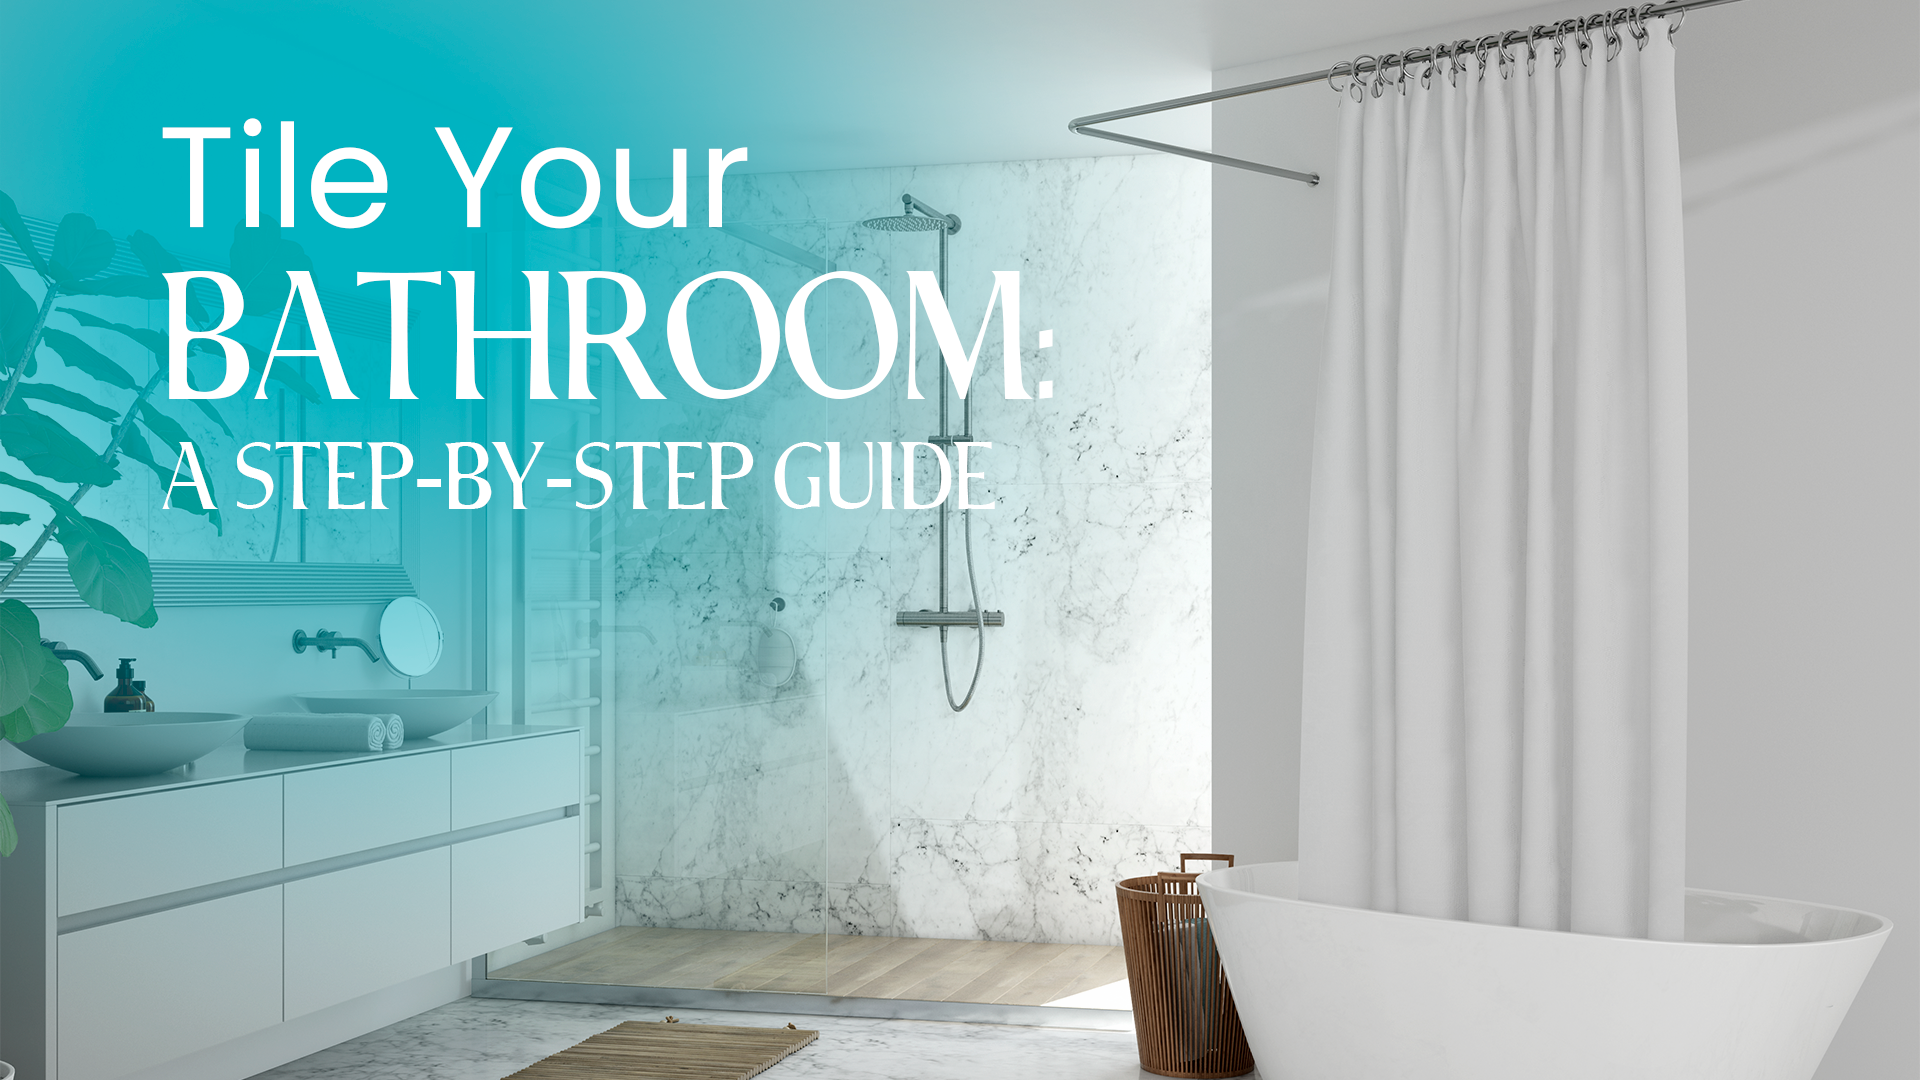 Tile Your Bathroom: A Step-by-Step Guide 